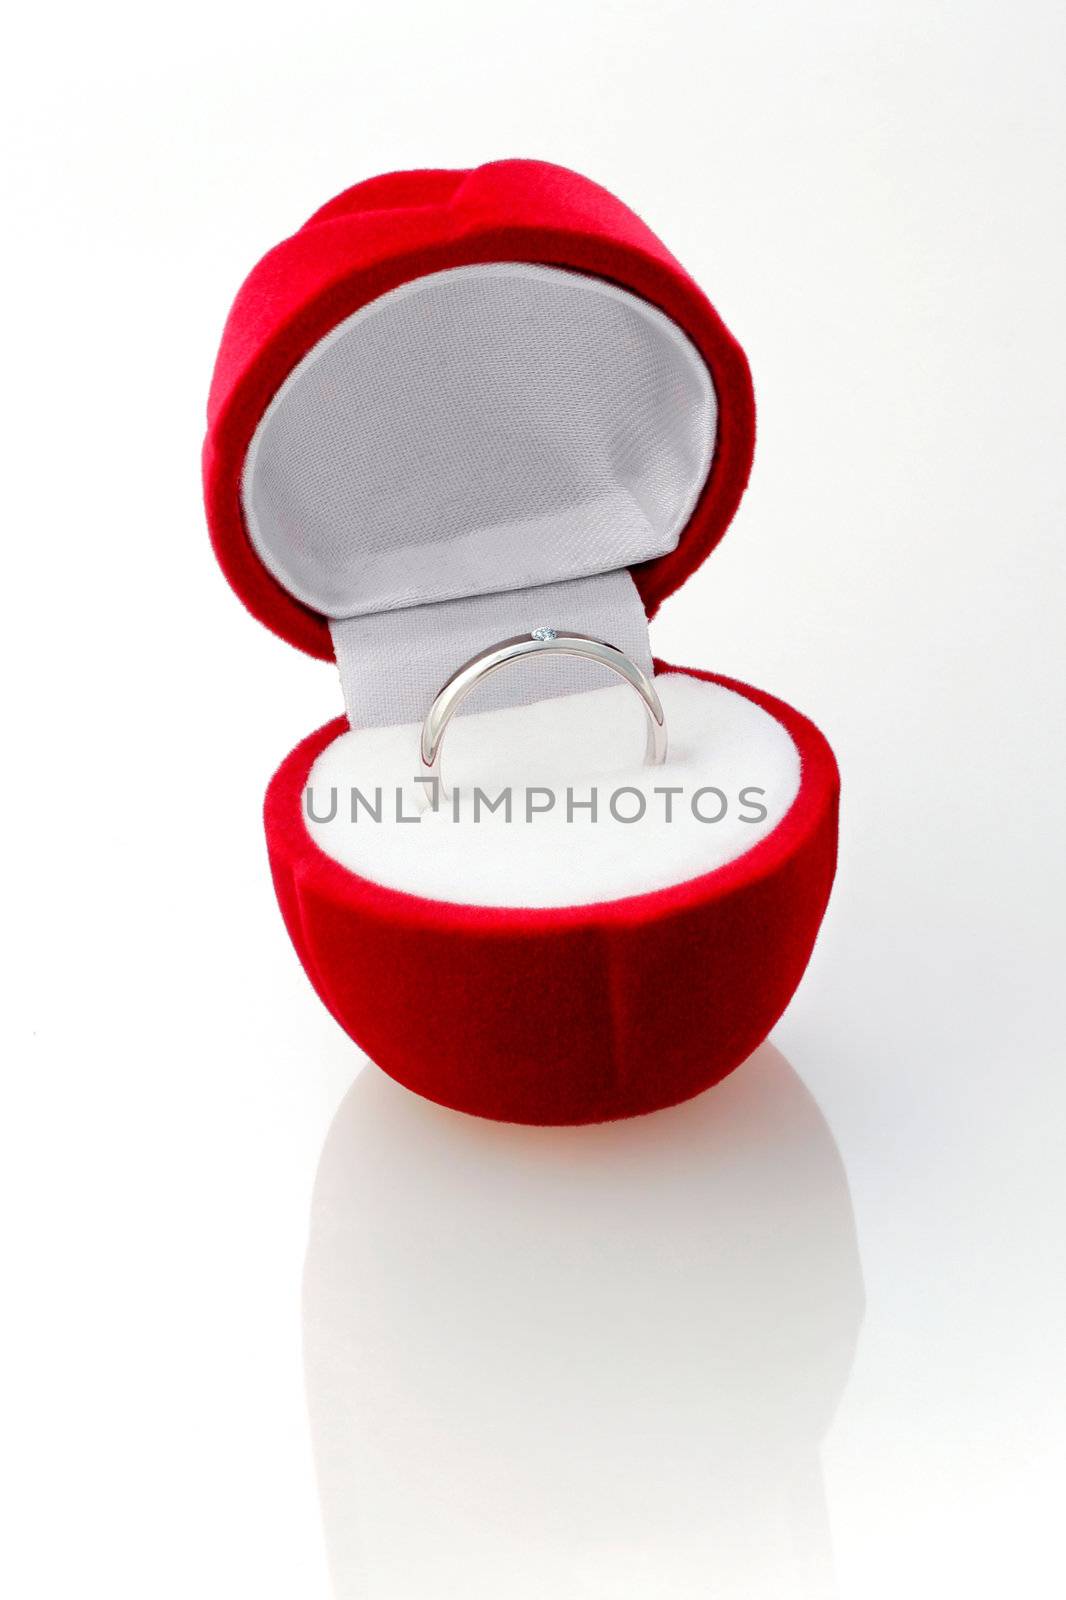 Diamond ring in the red box.